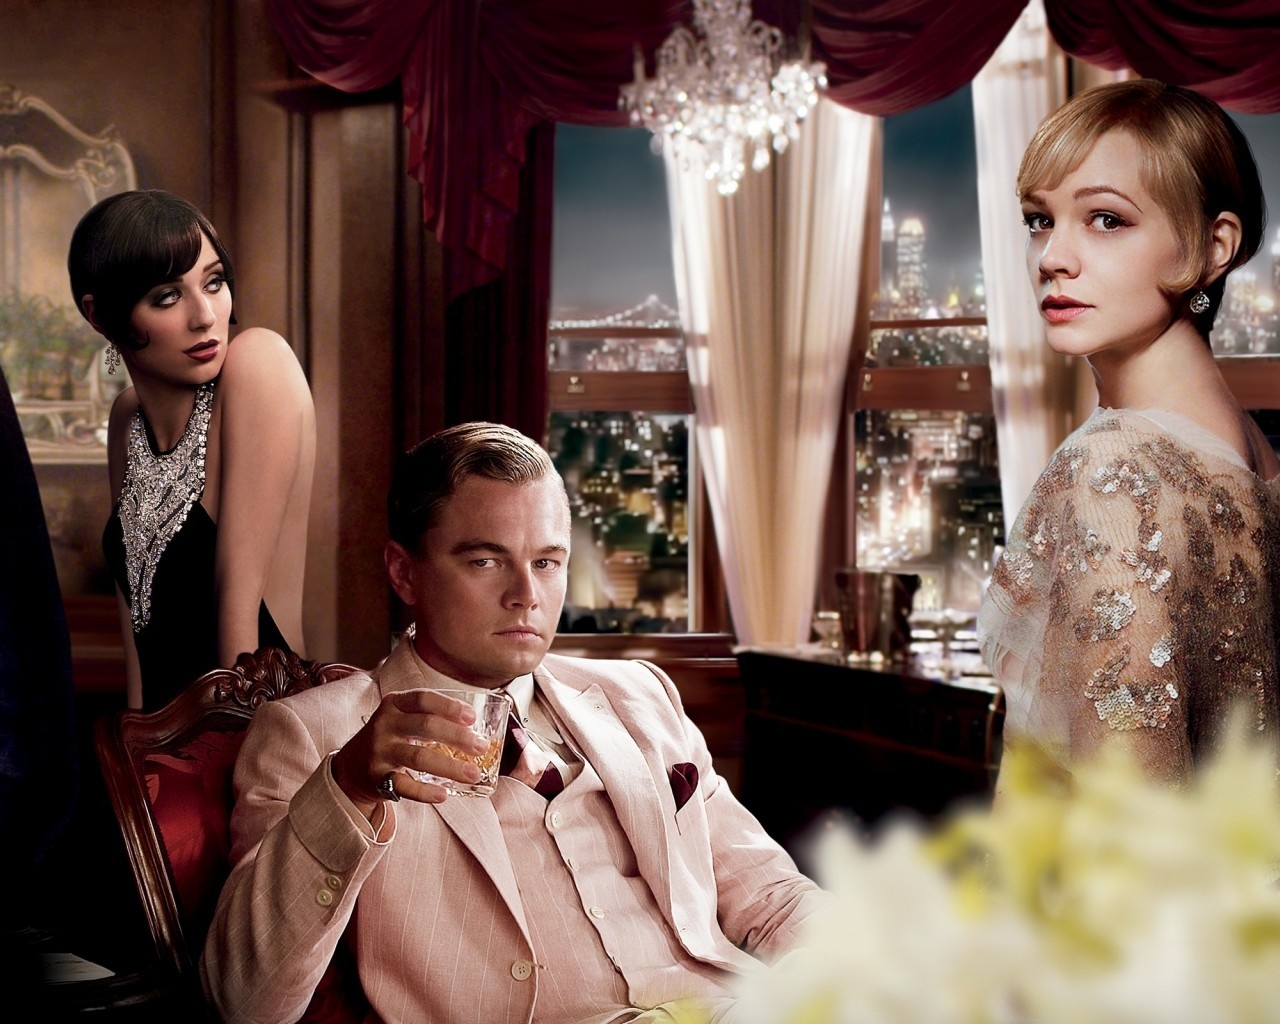 The Great Gatsby Poster for 1280 x 1024 resolution